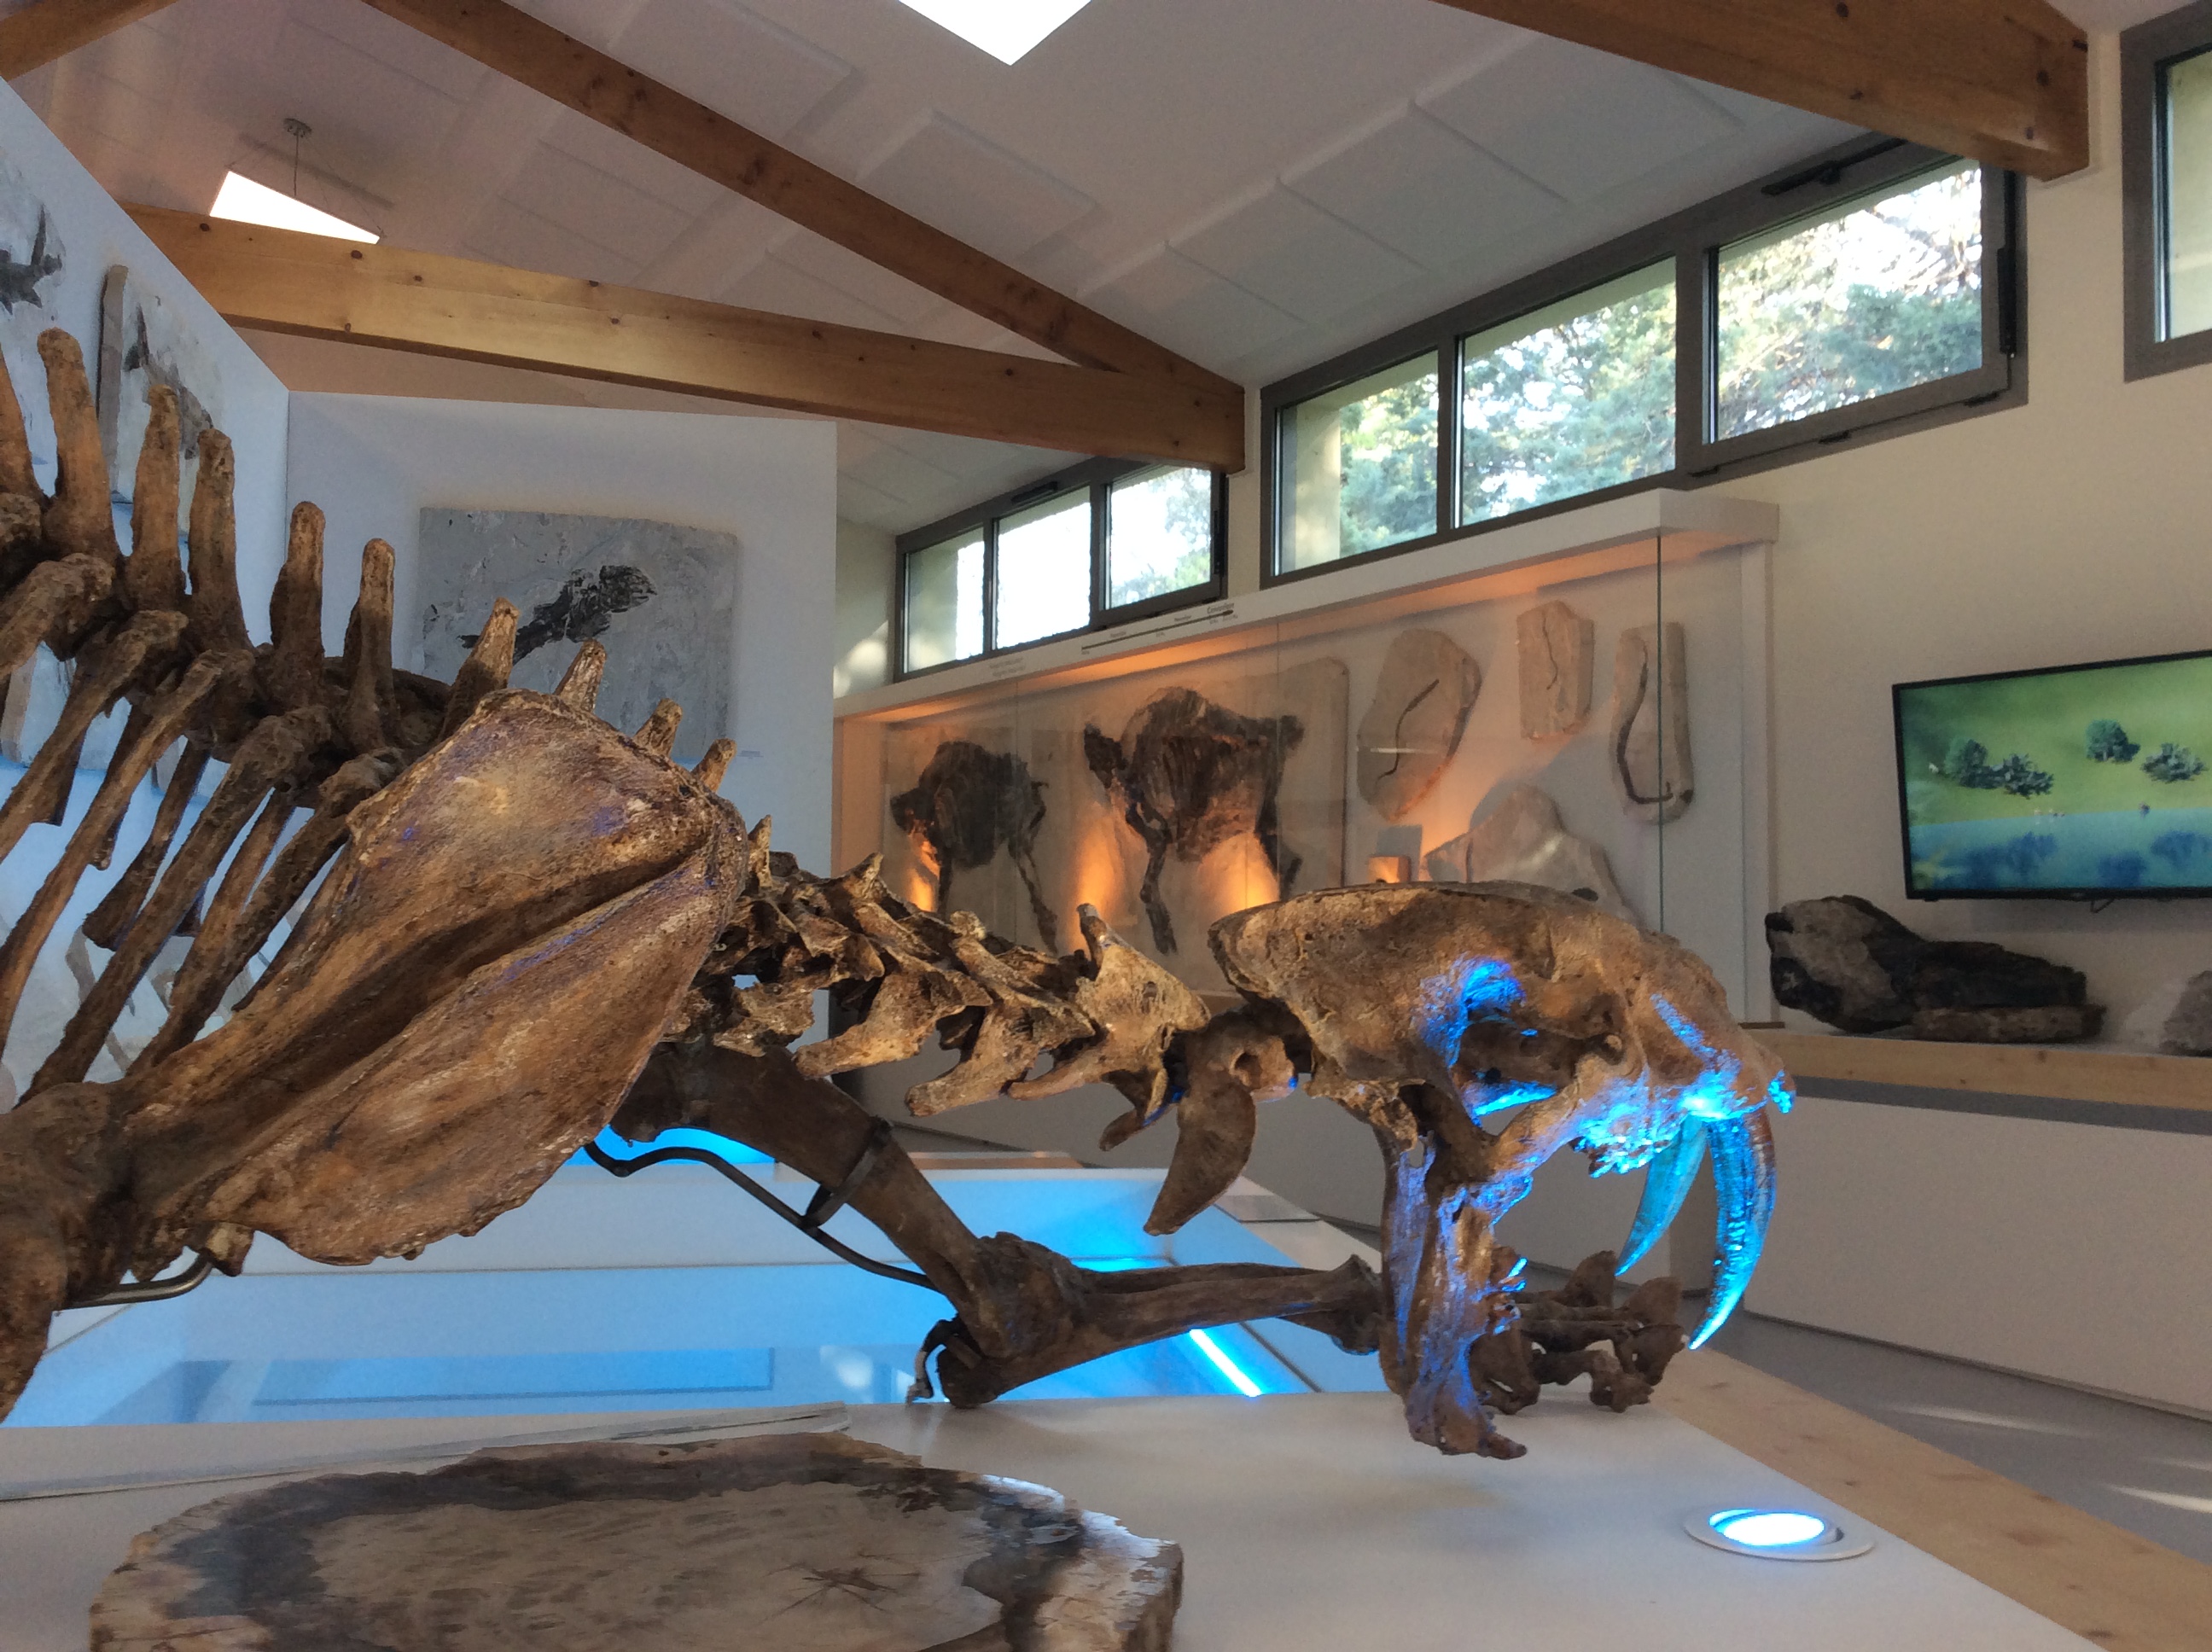 Tourist sites : Natural history museum of Ardèche : fossils and dinosaurs